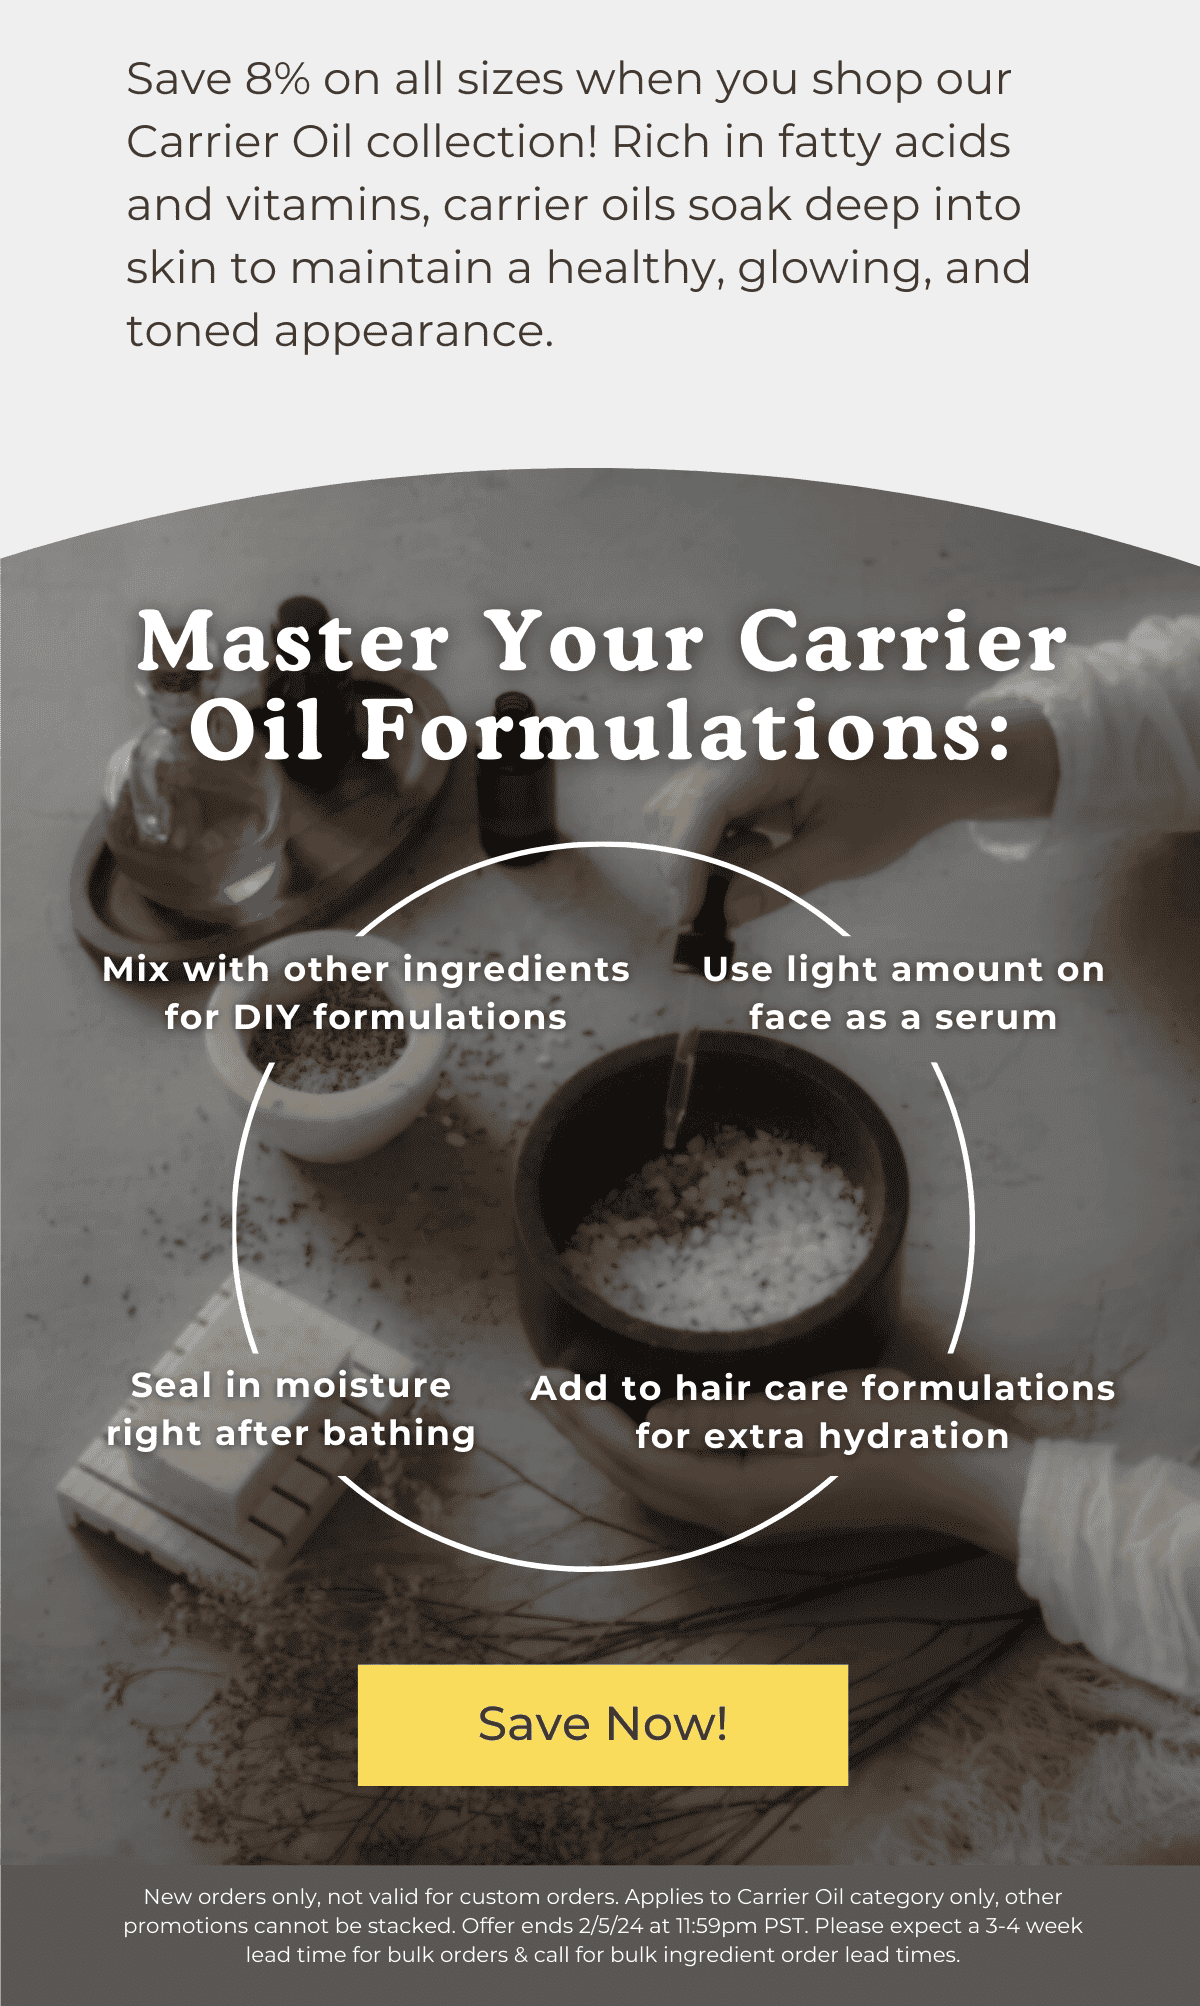 Save 8% on all sizes when you shop our Carrier Oil collection! Rich in fatty acids and vitamins, carrier oils soak deep into skin to maintain a healthy, glowing, and toned appearance. Master Your Carrier Oil Formulations: Mix with other ingredients for DIY formulations, Use light amount on face as a serum, Seal in moisture right after bathing, Add to hair care formulations for extra hydration. SAVE NOW! *New orders only, not valid for custom orders. Applies to Carrier Oil category only, other promotions cannot be stacked. Offer ends 2/5/24 at 11:59pm PST. Please expect a 3-4 week lead time for bulk orders & call for bulk ingredient order lead times.